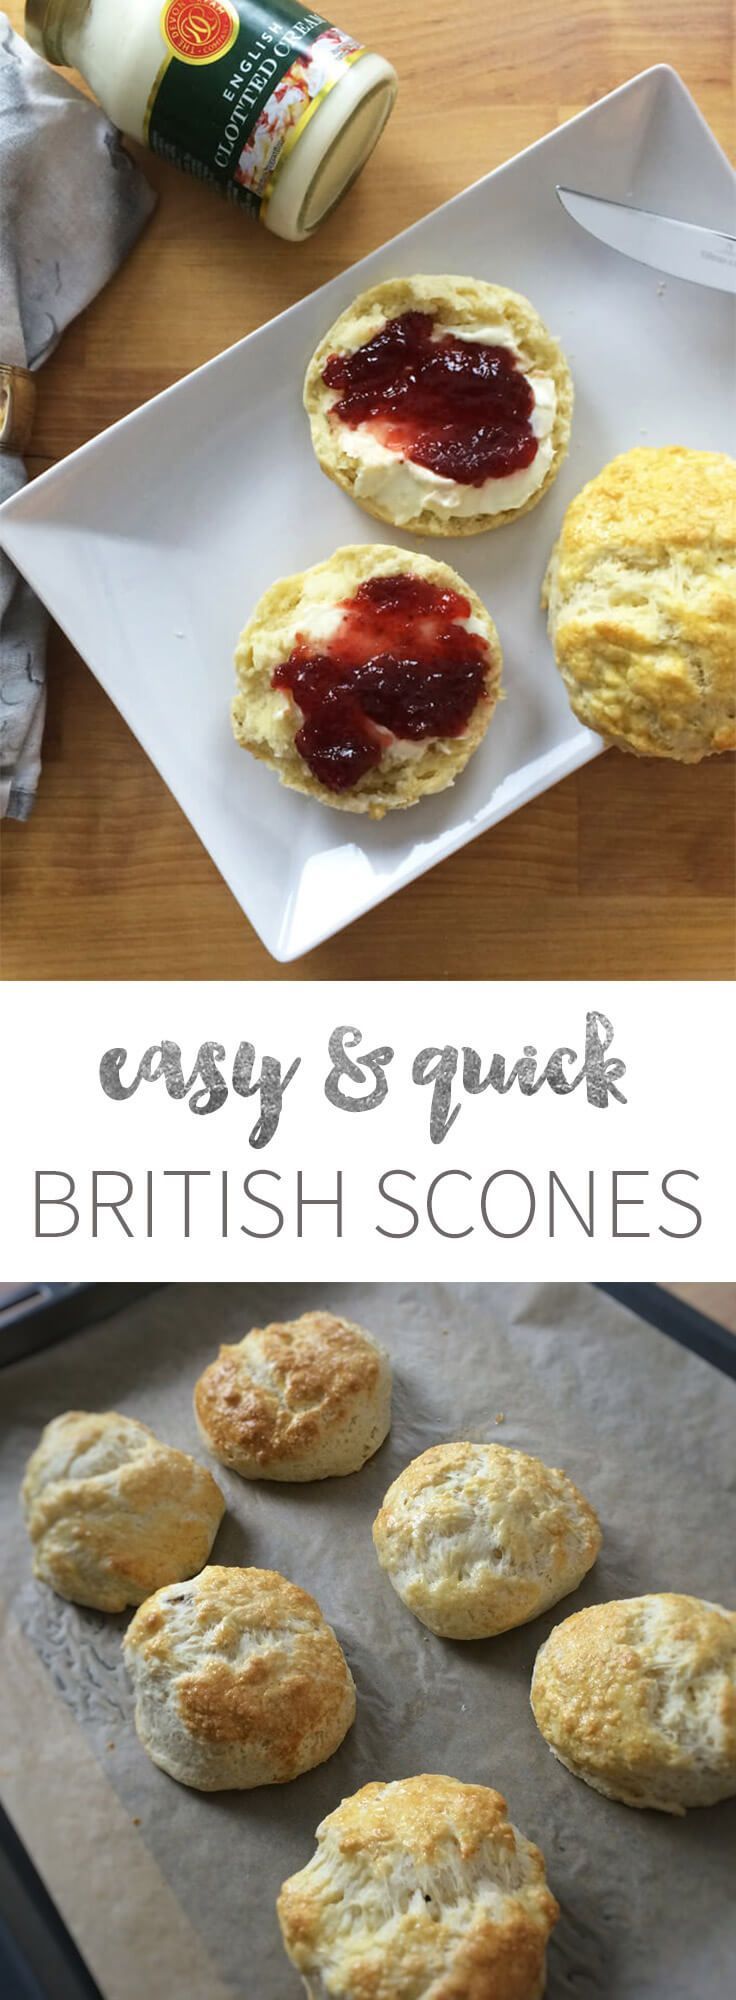 Easy British Afternoon-Tea Scones - perfect for entertaining guests and super fast and easy to make! You can make them in advance and freeze them. -   20 baking recipes scones
 ideas